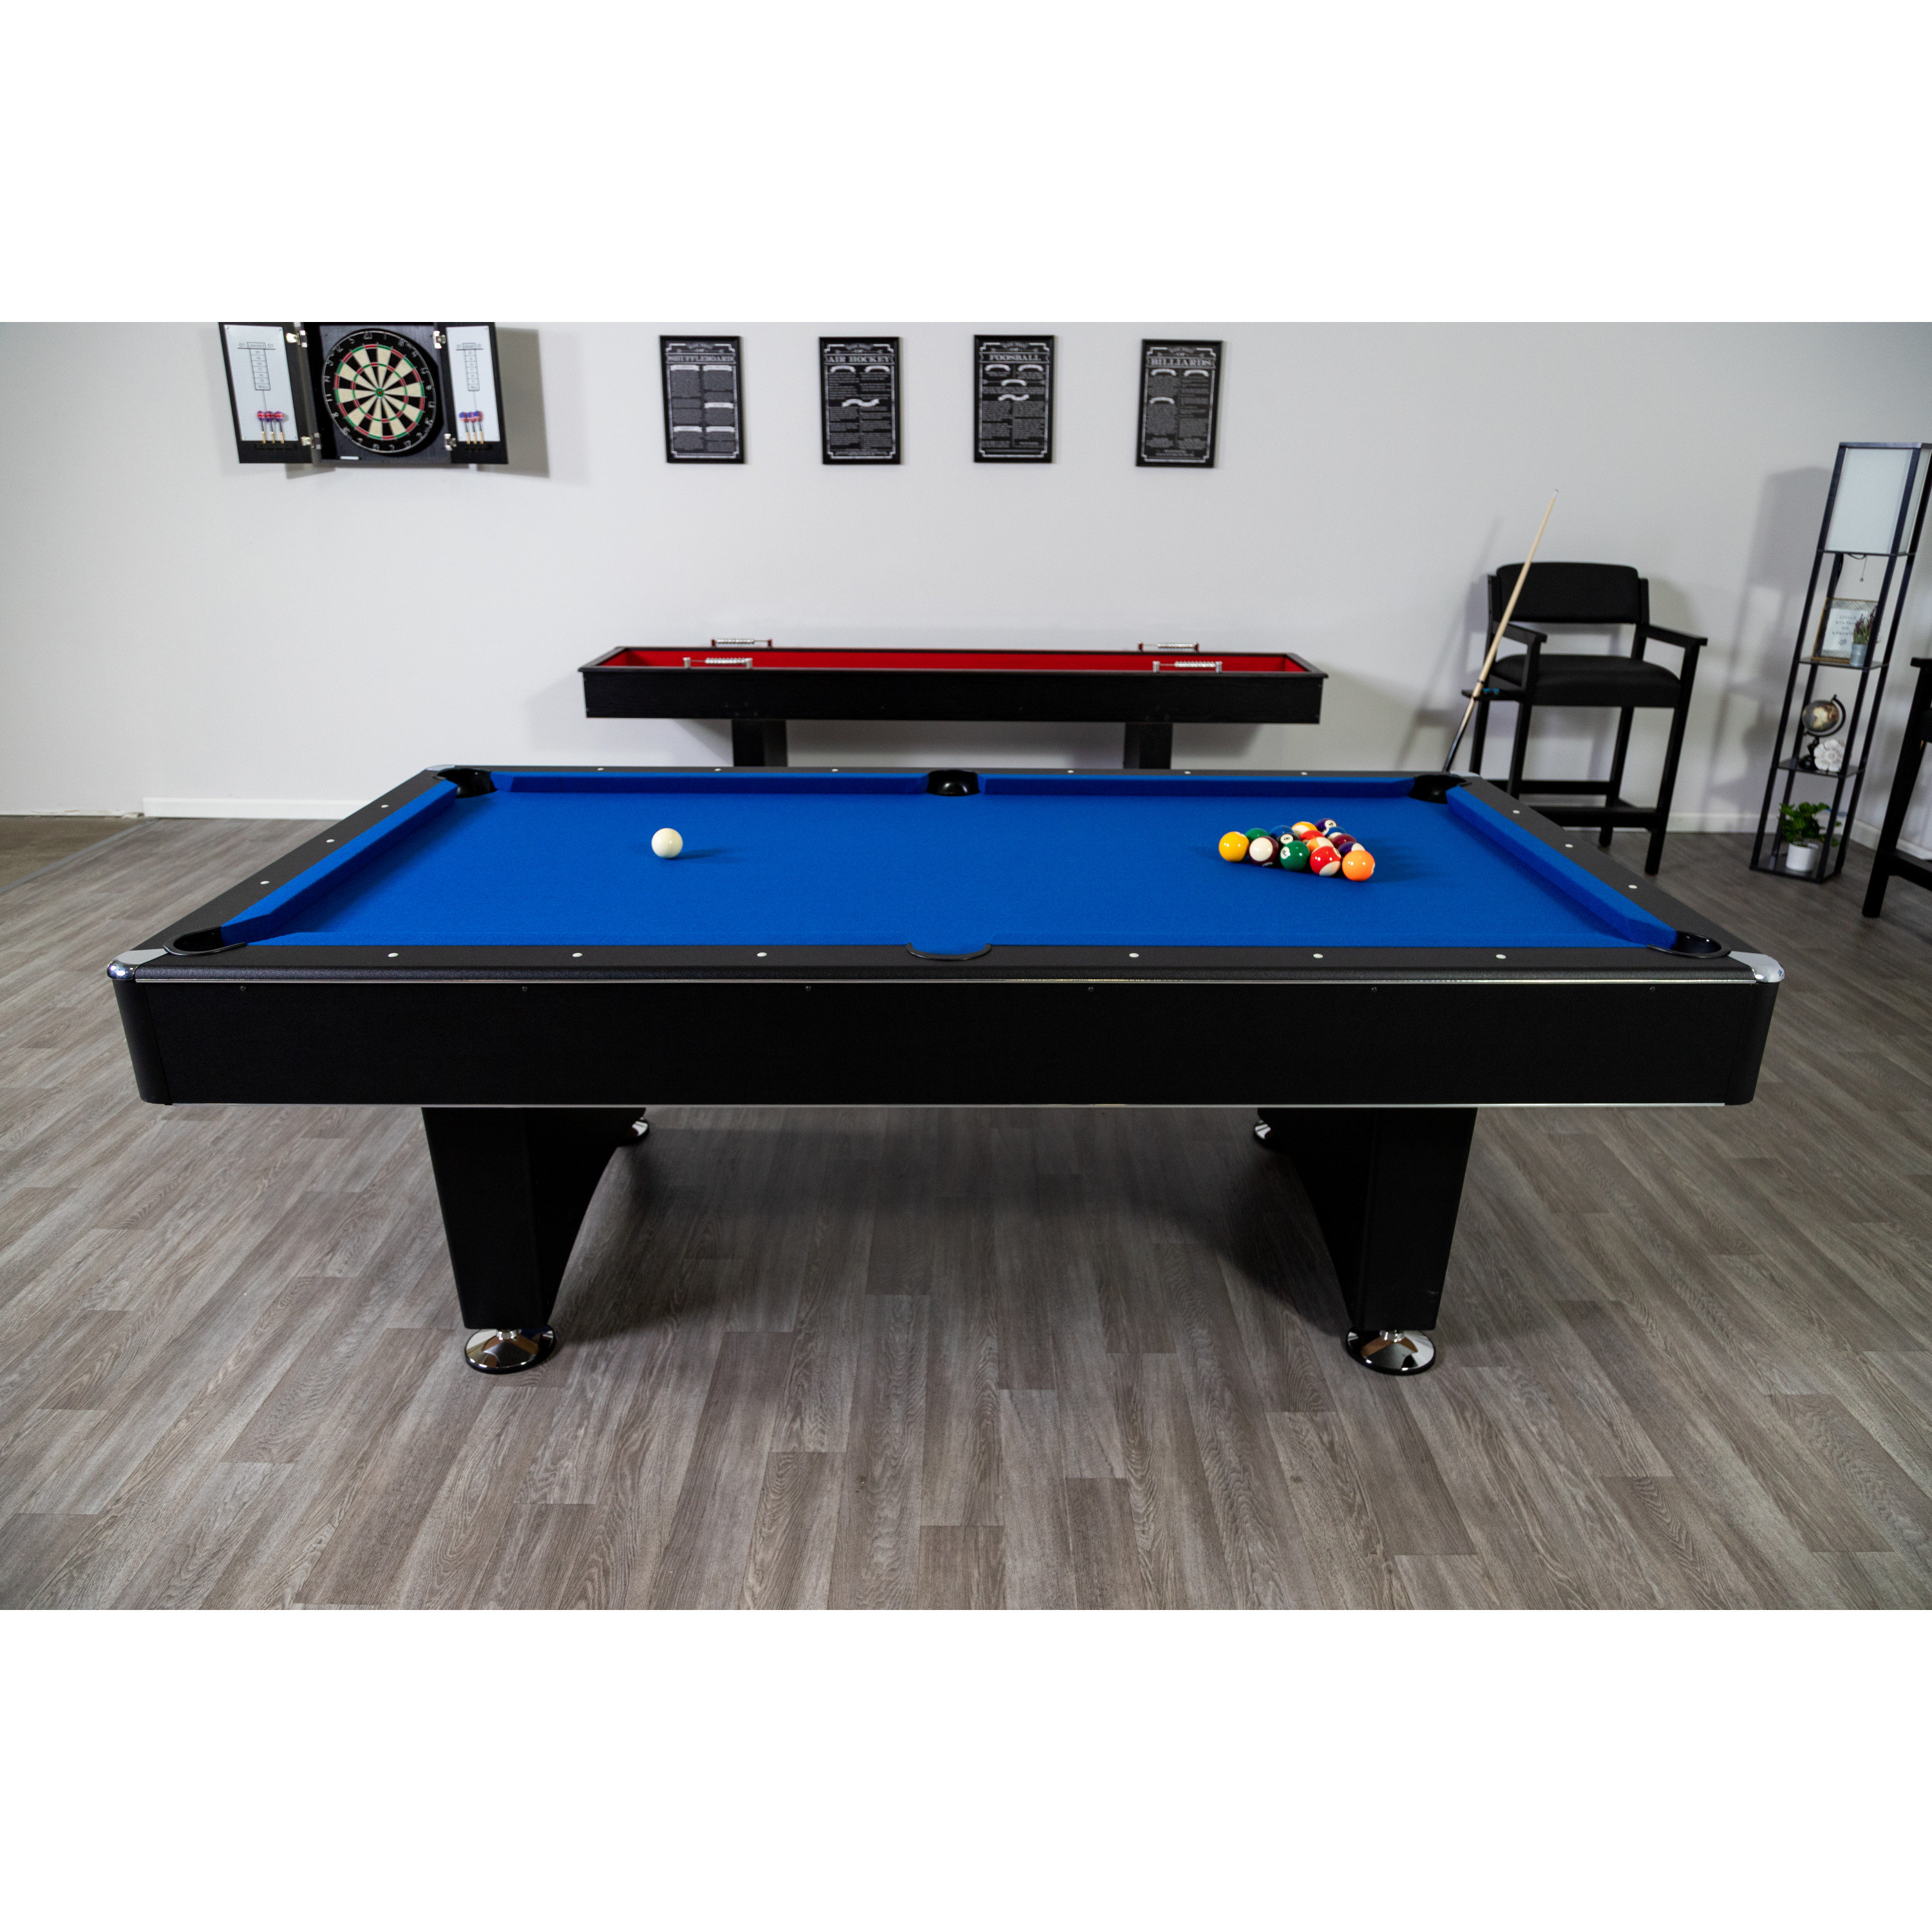  Mini Pool Table, 3Ft / 40 Billiard Table with 21 Accessories,  2 Wood Cues, Chalk,16 Balls,Triangle Rack, Cleaning Brush, Indoor Compact  Design for Kids Adults Family and Pet Friendly. 